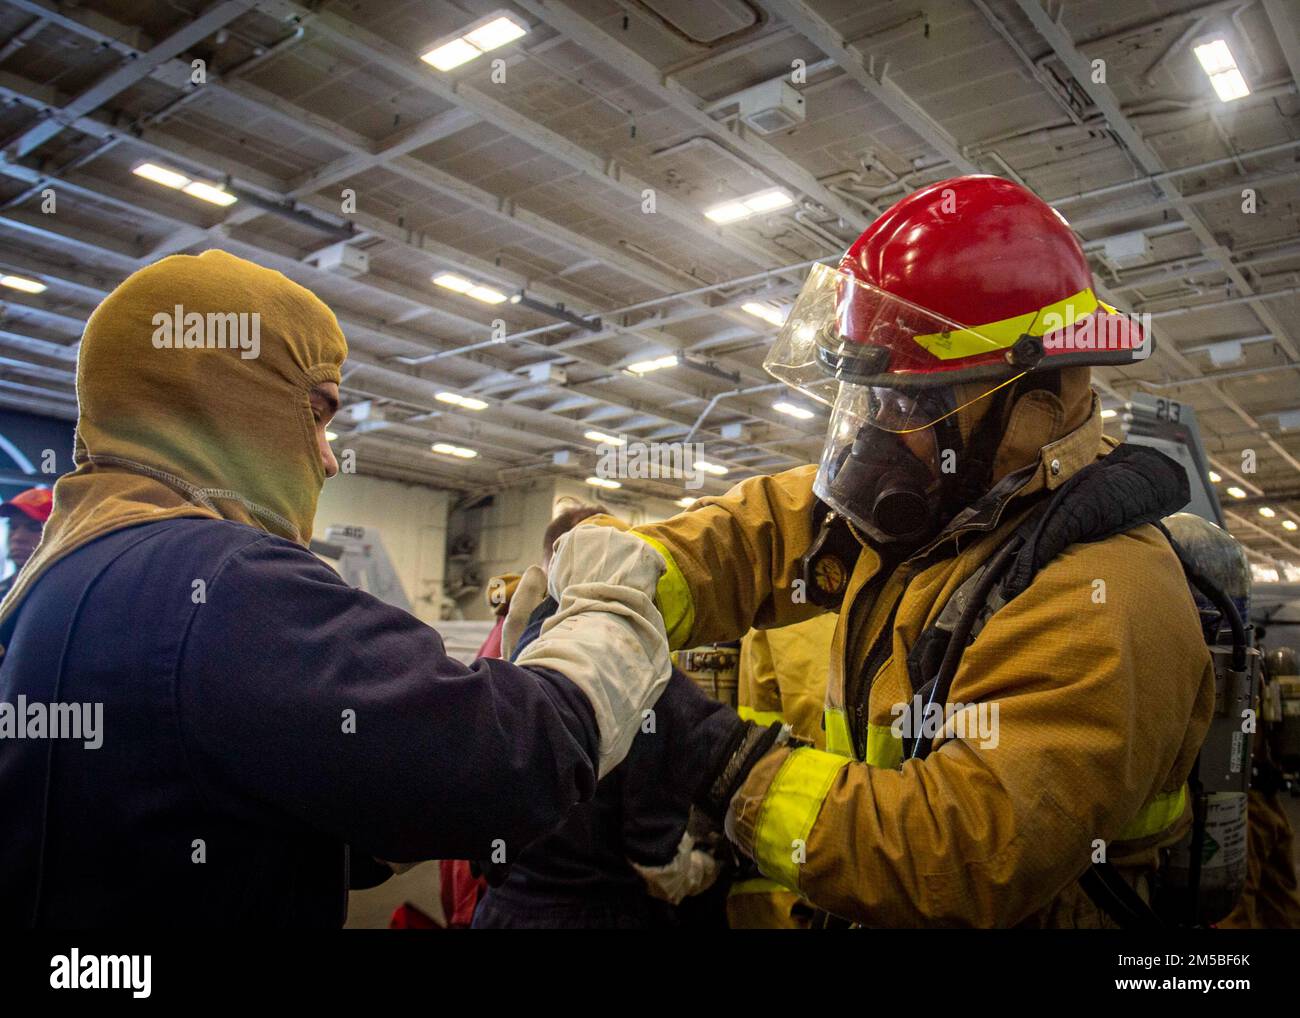 220221-N-SY758-1007 ATLANTIC OCEAN (Feb. 21, 2022) Sailors assigned to USS George H.W. Bush (CVN 77) don firefighting gear during a damage control drill for Tailored Ship’s Training Availability/Final Evaluation Problem (TSTA/FEP), Feb. 21, 2022. TSTA/FEP is a multi-phase training evolution designed to give the crew a solid foundation of unit-level operating proficiency and to enhance the ship’s ability to self-train. George H.W. Bush provides the national command authority flexible, tailorable war fighting capability through the carrier strike group that maintains maritime stability and secur Stock Photo